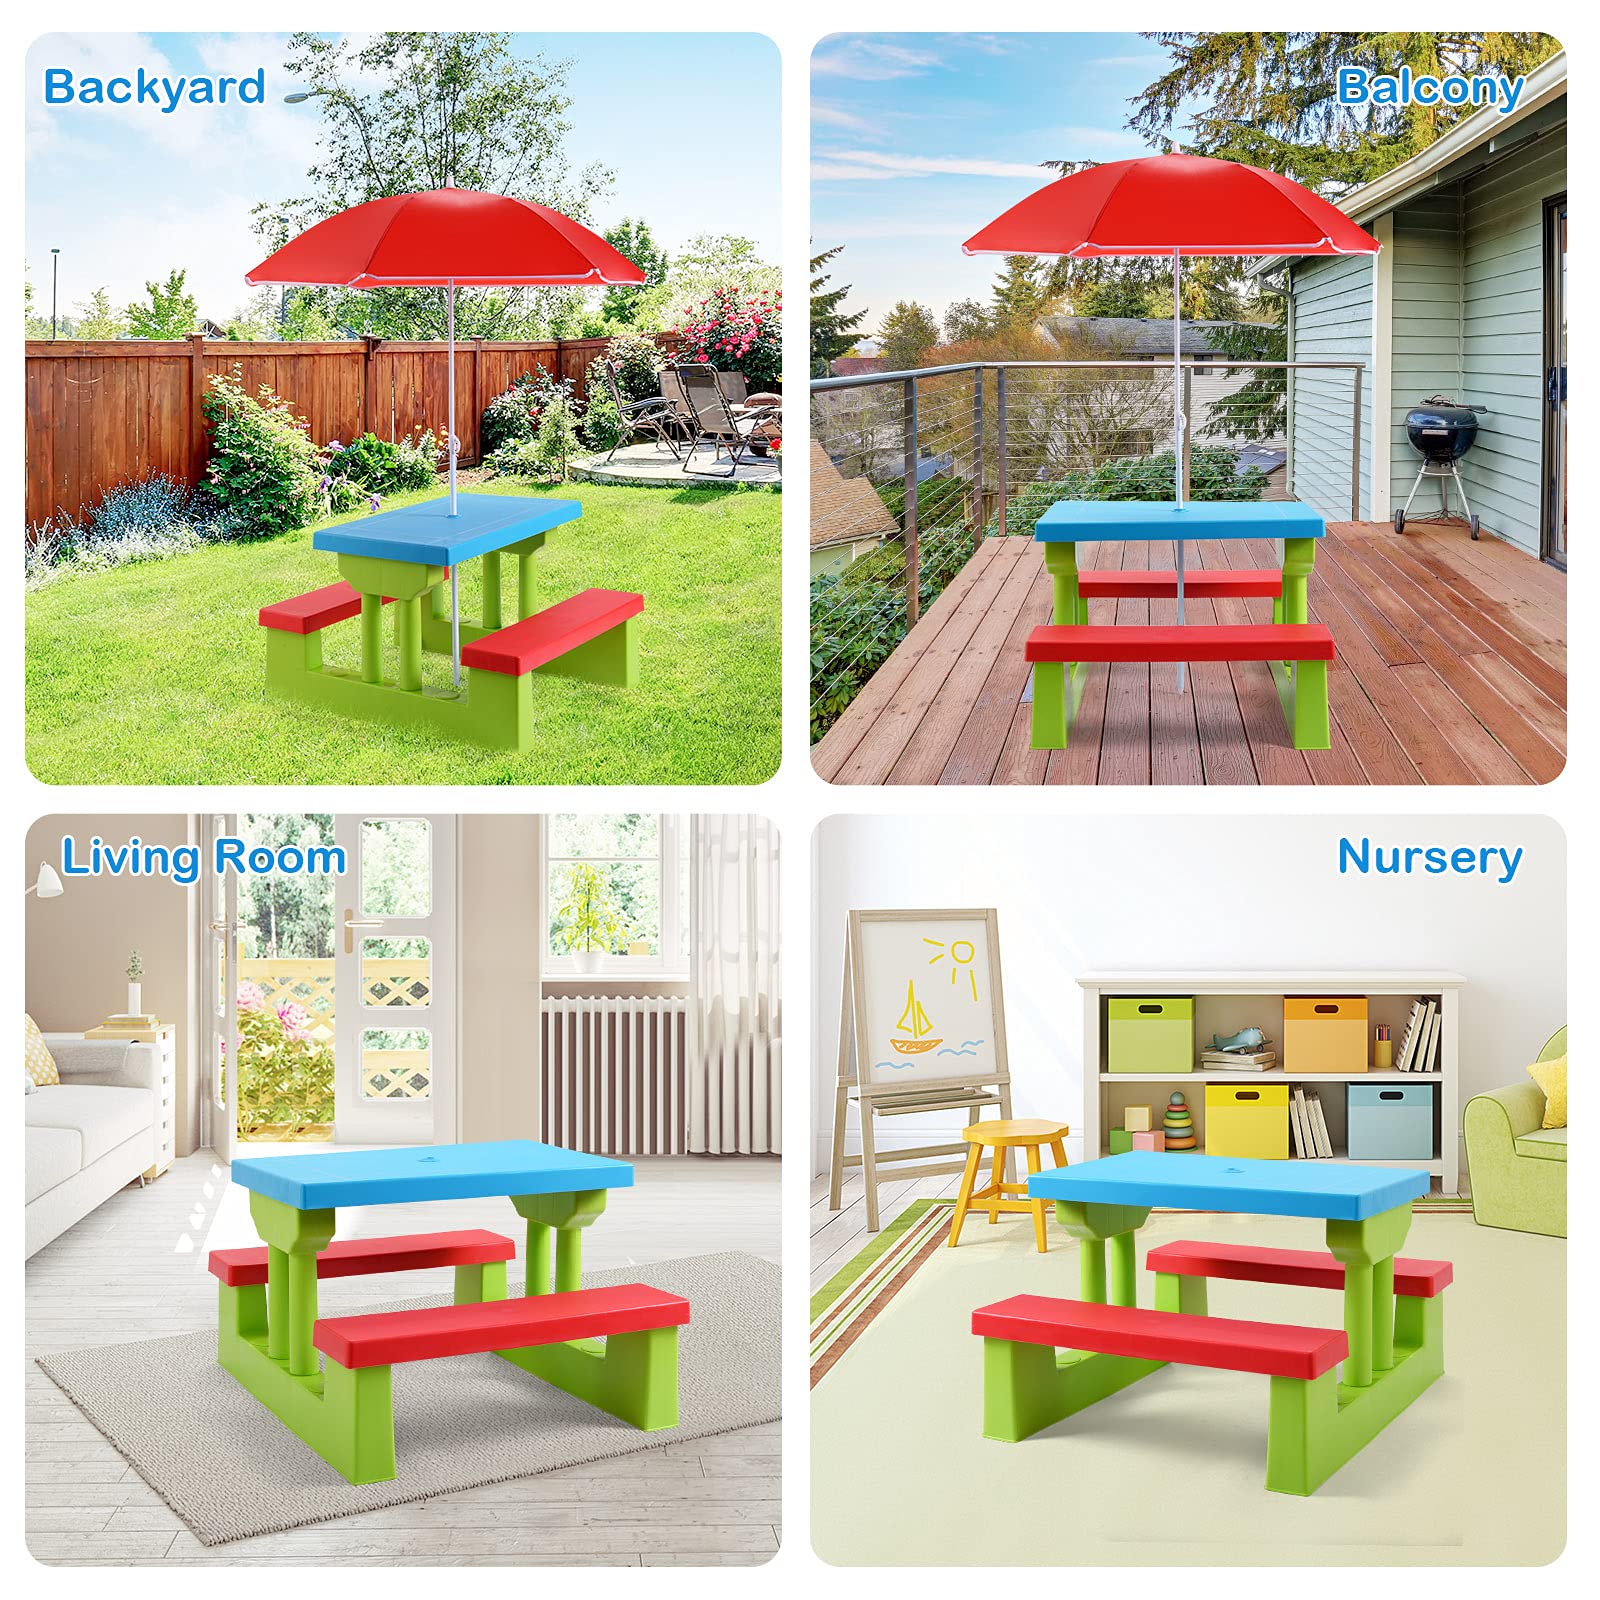 ARMILE Kids Picnic Table, Kids Indoor & Outdoor Table and Bench Set with Removable & Foldable Umbrella, Portable Toddler Plastic Picnic Table for Patio, Backyard, Ideal Gift for Boys Girls(Red)